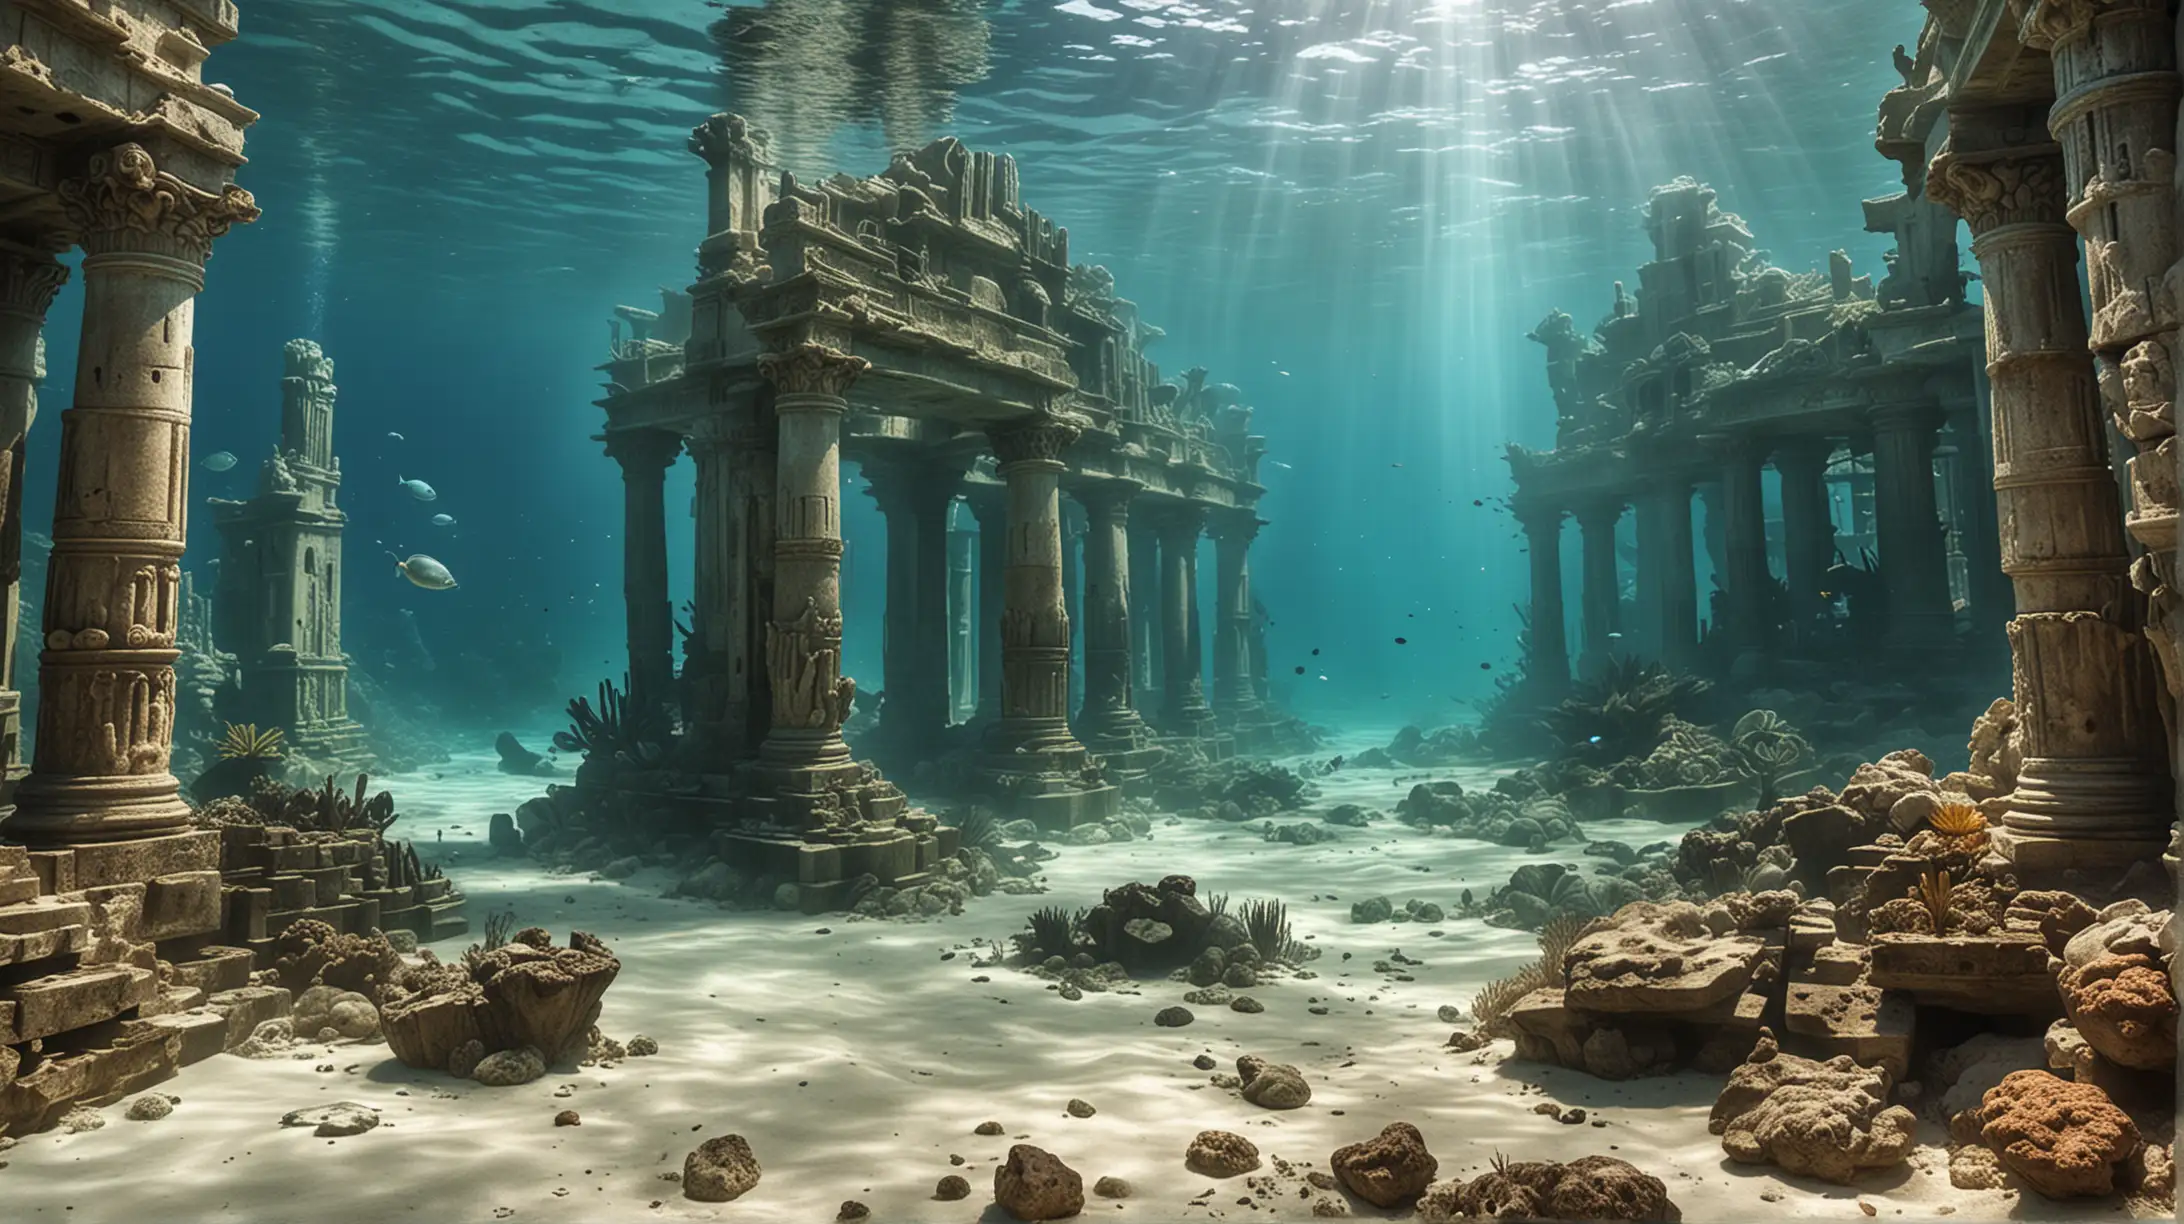 Underwater Exploration Discovering the Lost City of Atlantis Amongst Sand and Ruins